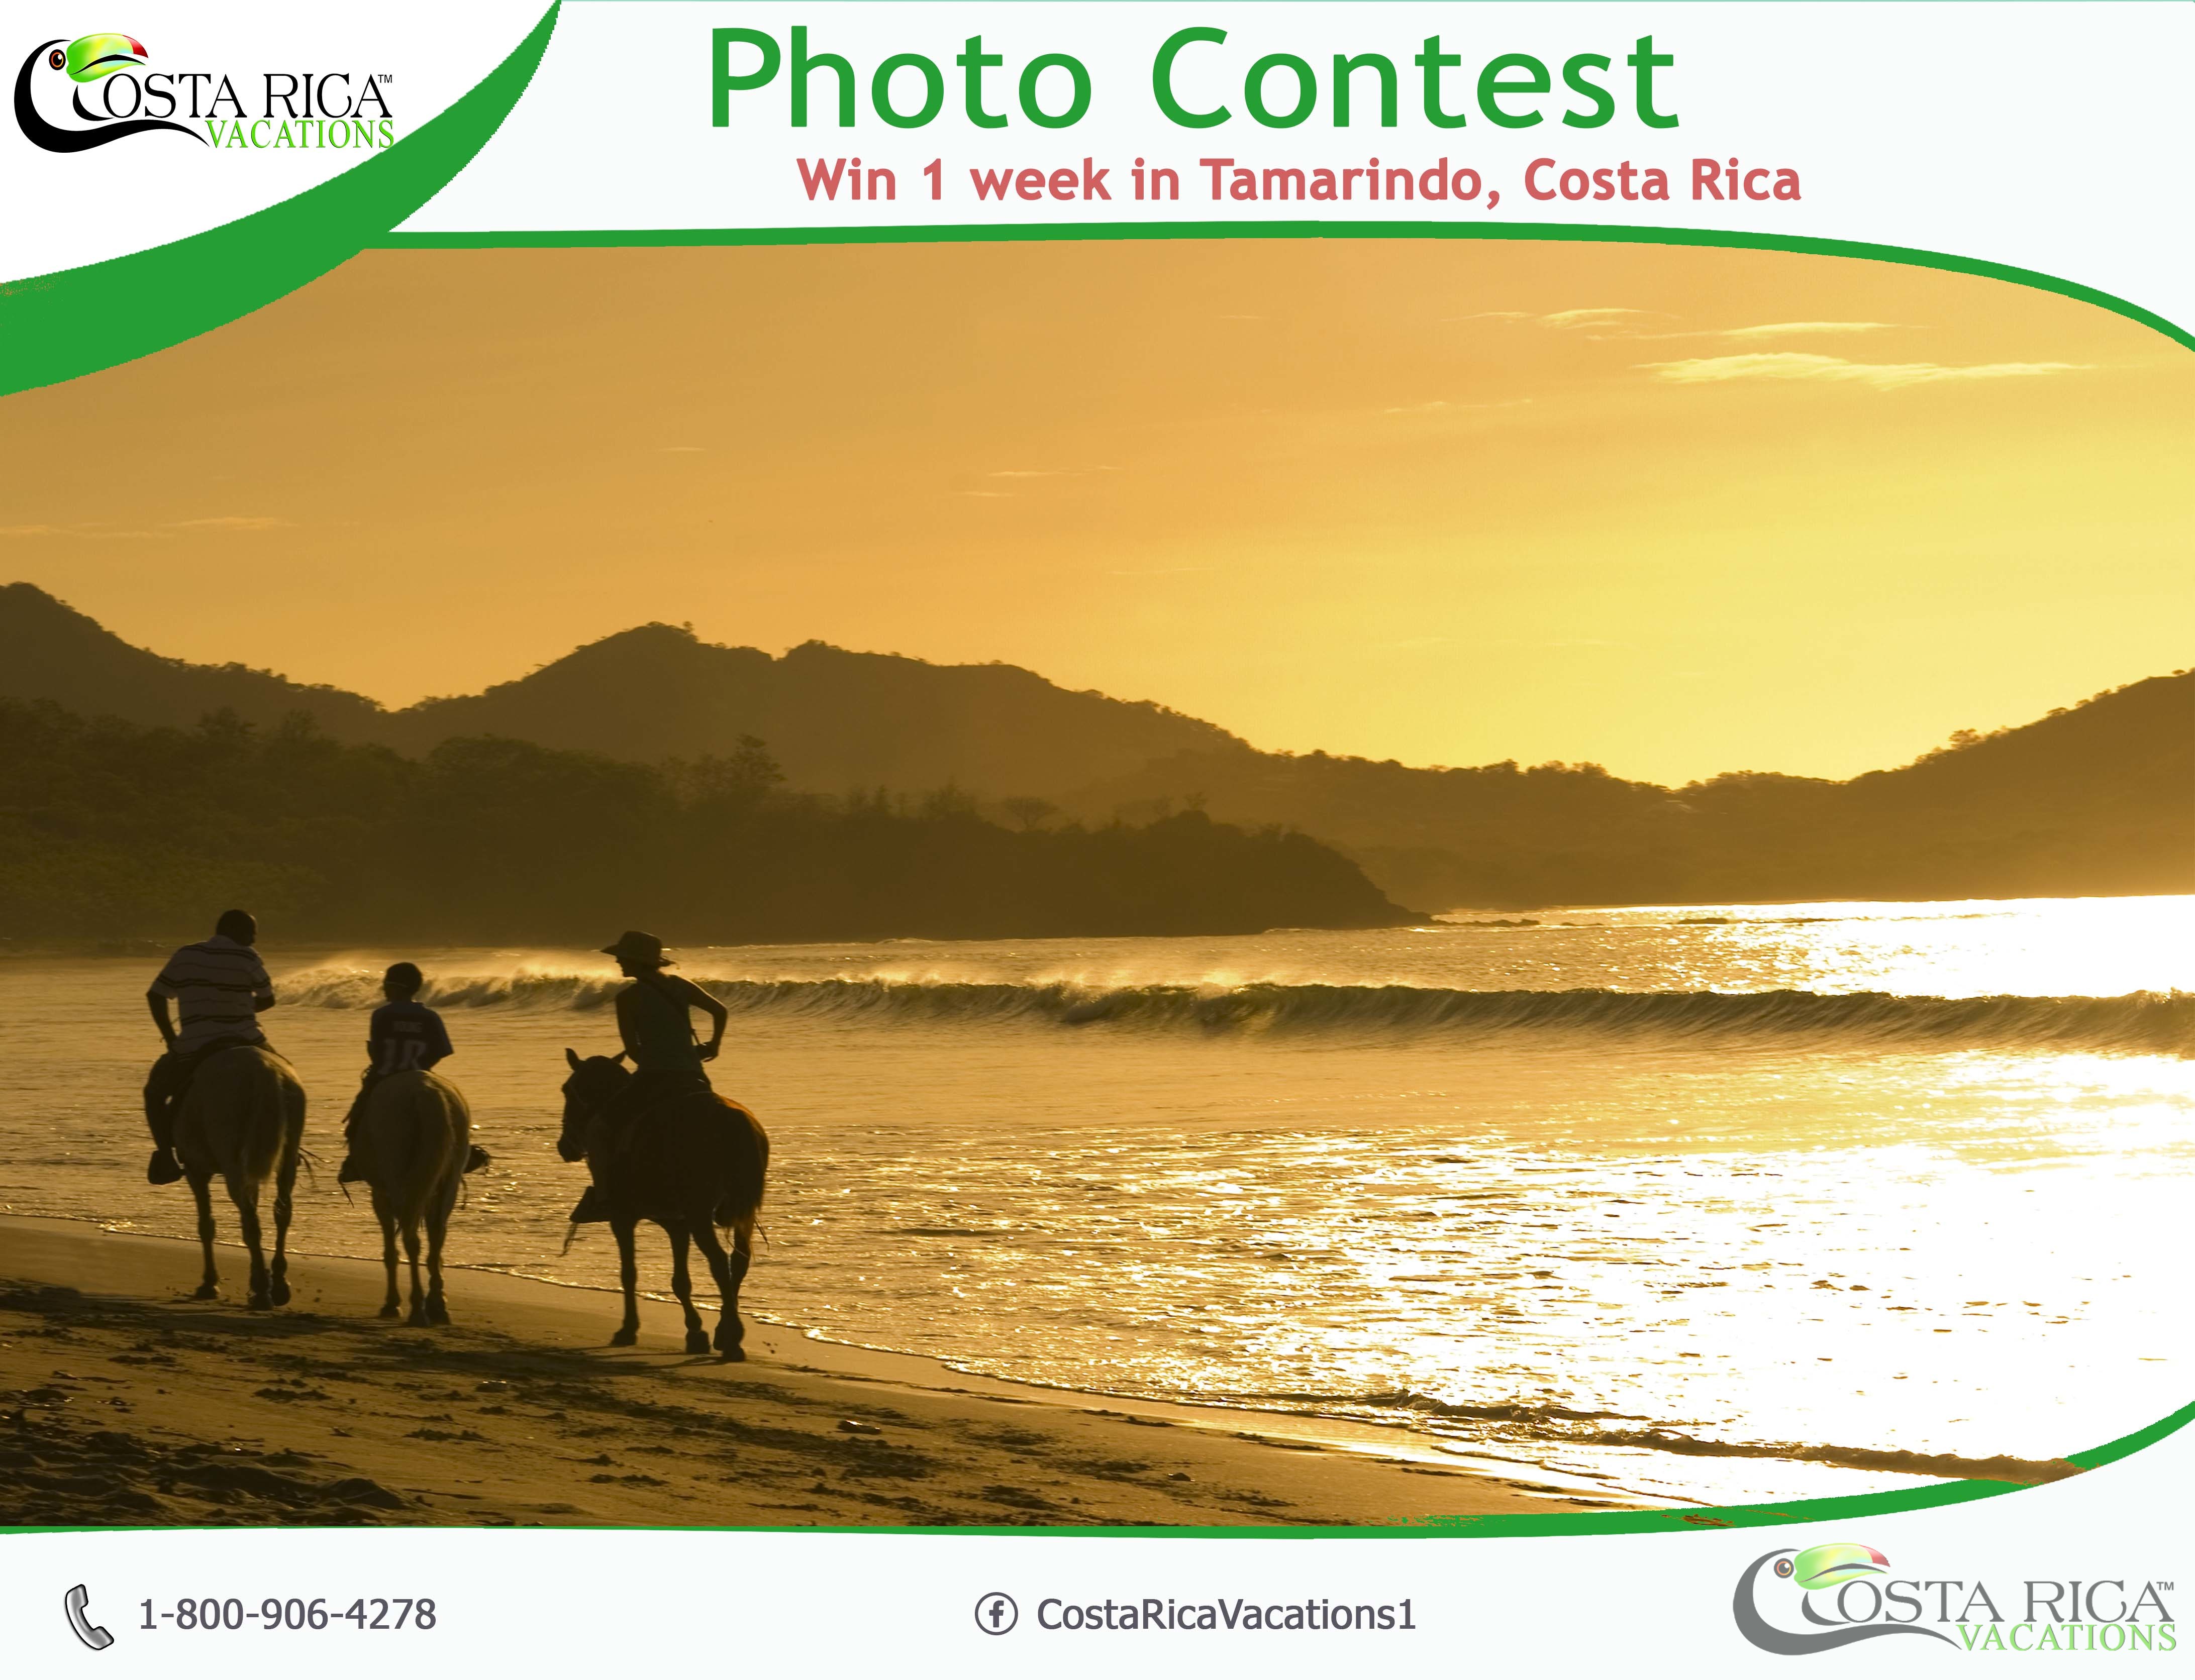 Our photo contest is for US and Canadians residents.